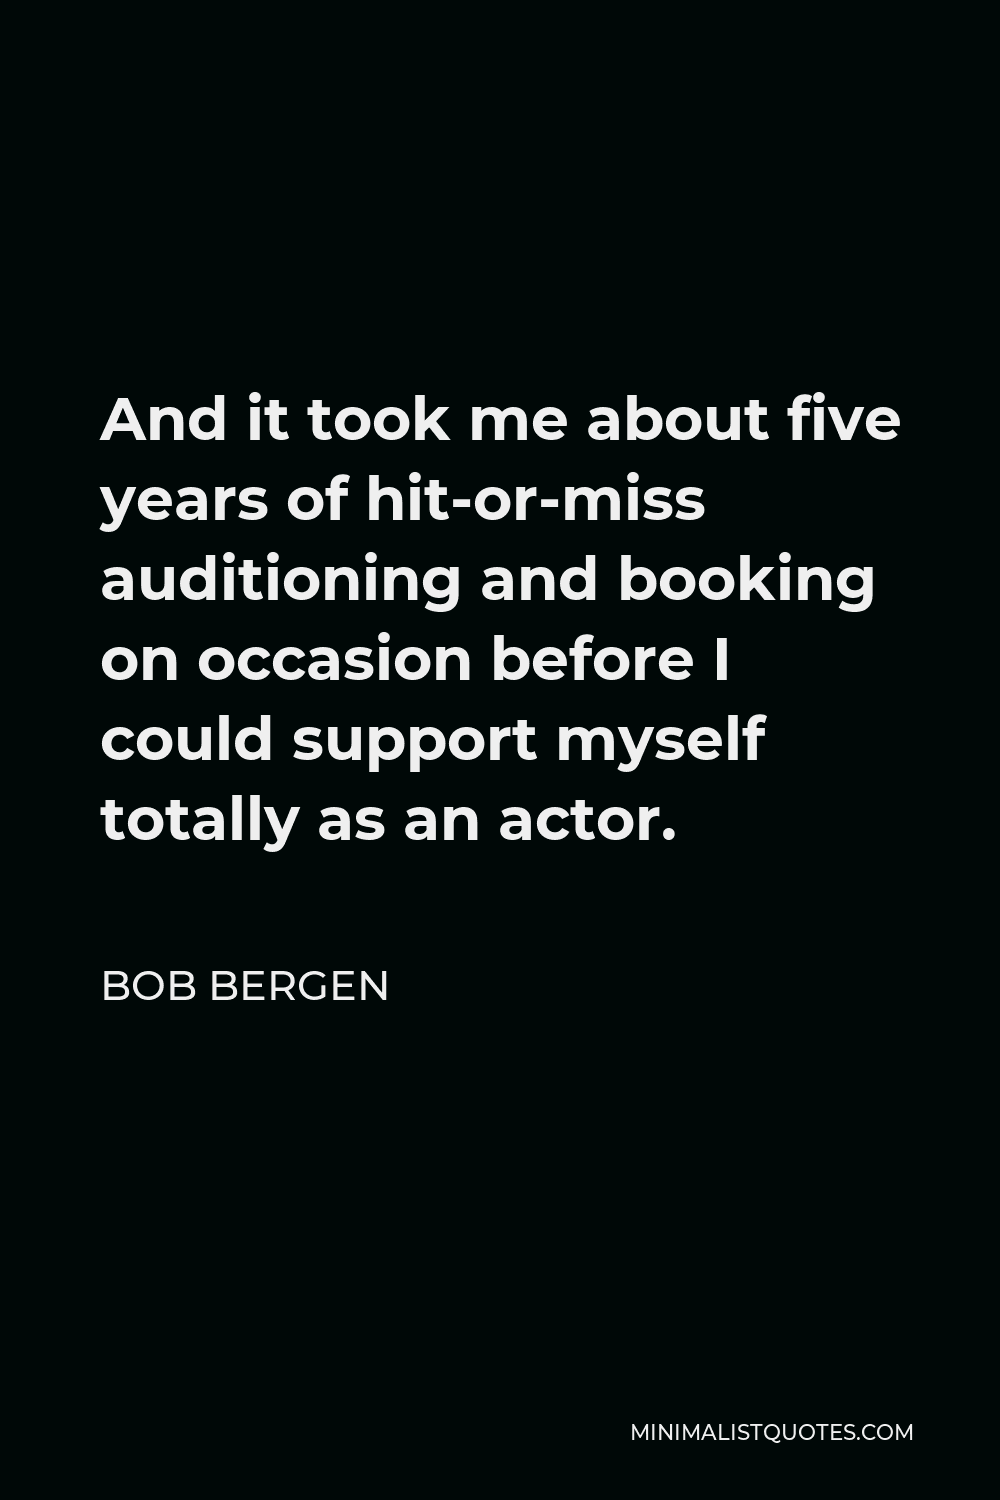 Bob Bergen Quote - And it took me about five years of hit-or-miss auditioning and booking on occasion before I could support myself totally as an actor.